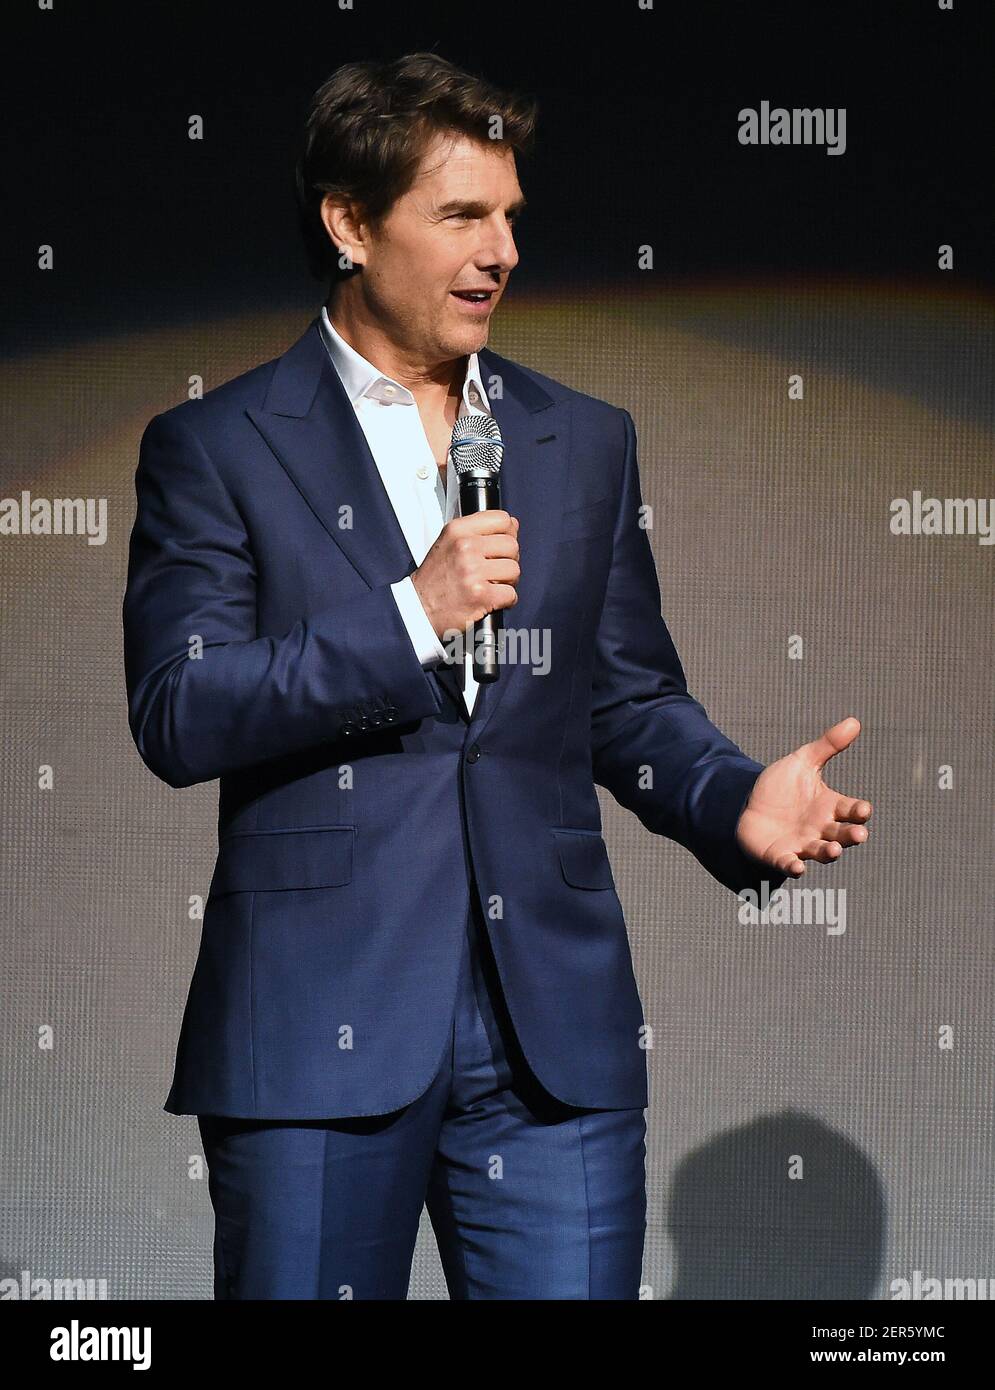 LAS VEGAS, NV - APRIL 25: Actor Tom Cruise onstage during the Paramount  Pictures presentation at CinemaCon 2018 at The Colosseum at Caesars Palace  on April 25, 2018 in Las Vegas, Nevada. (